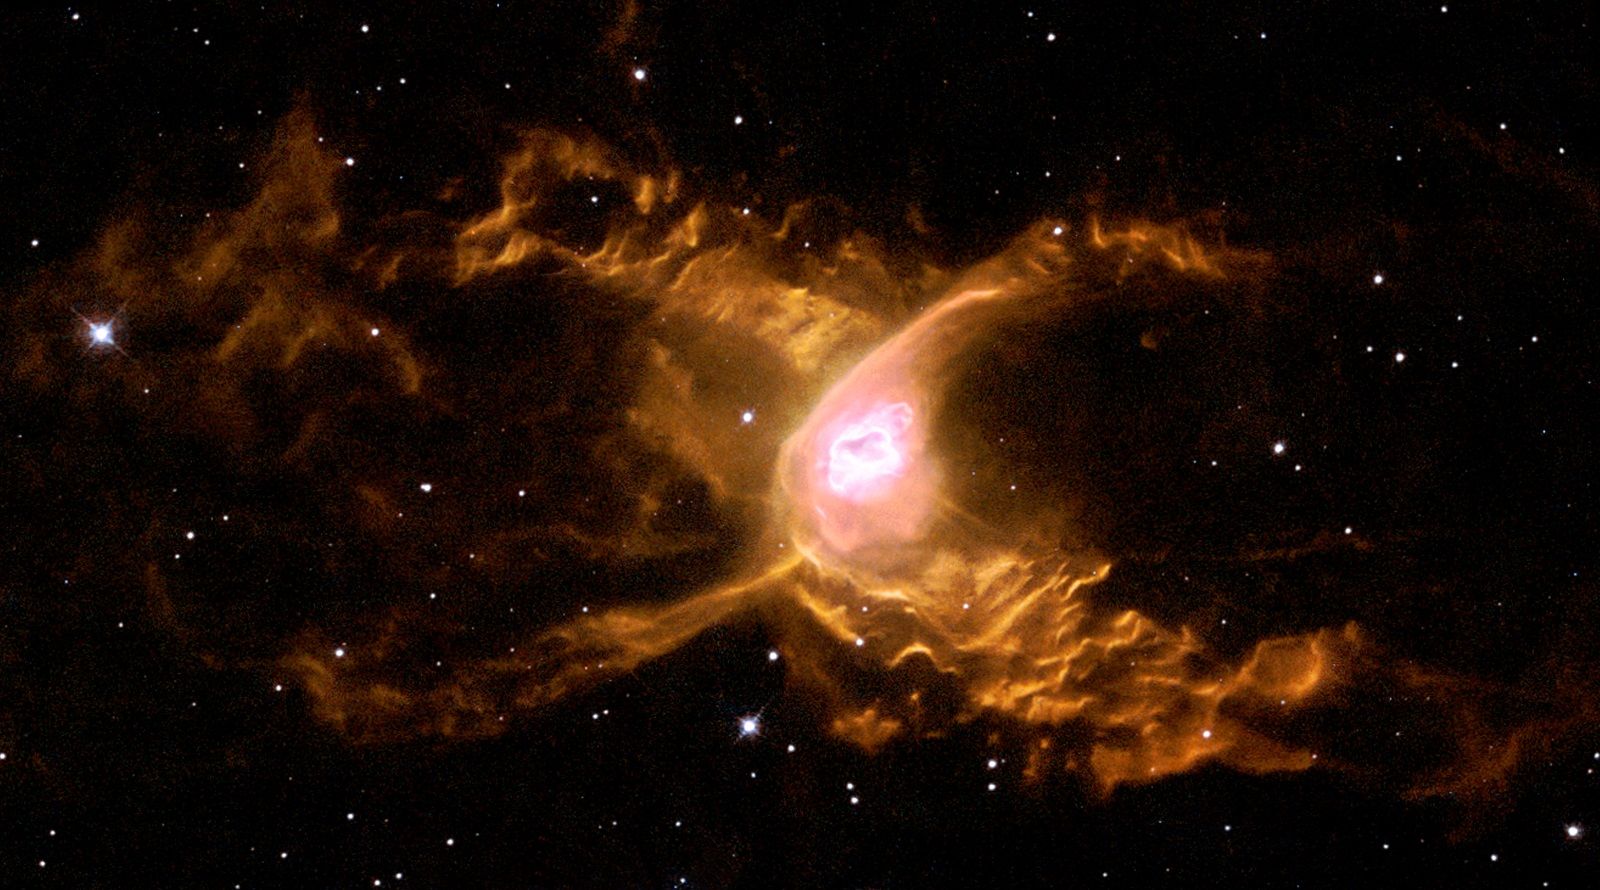 Astounding Images From The Depths Of The Universe Courtesy Of The Hubble Space Telescope image 4